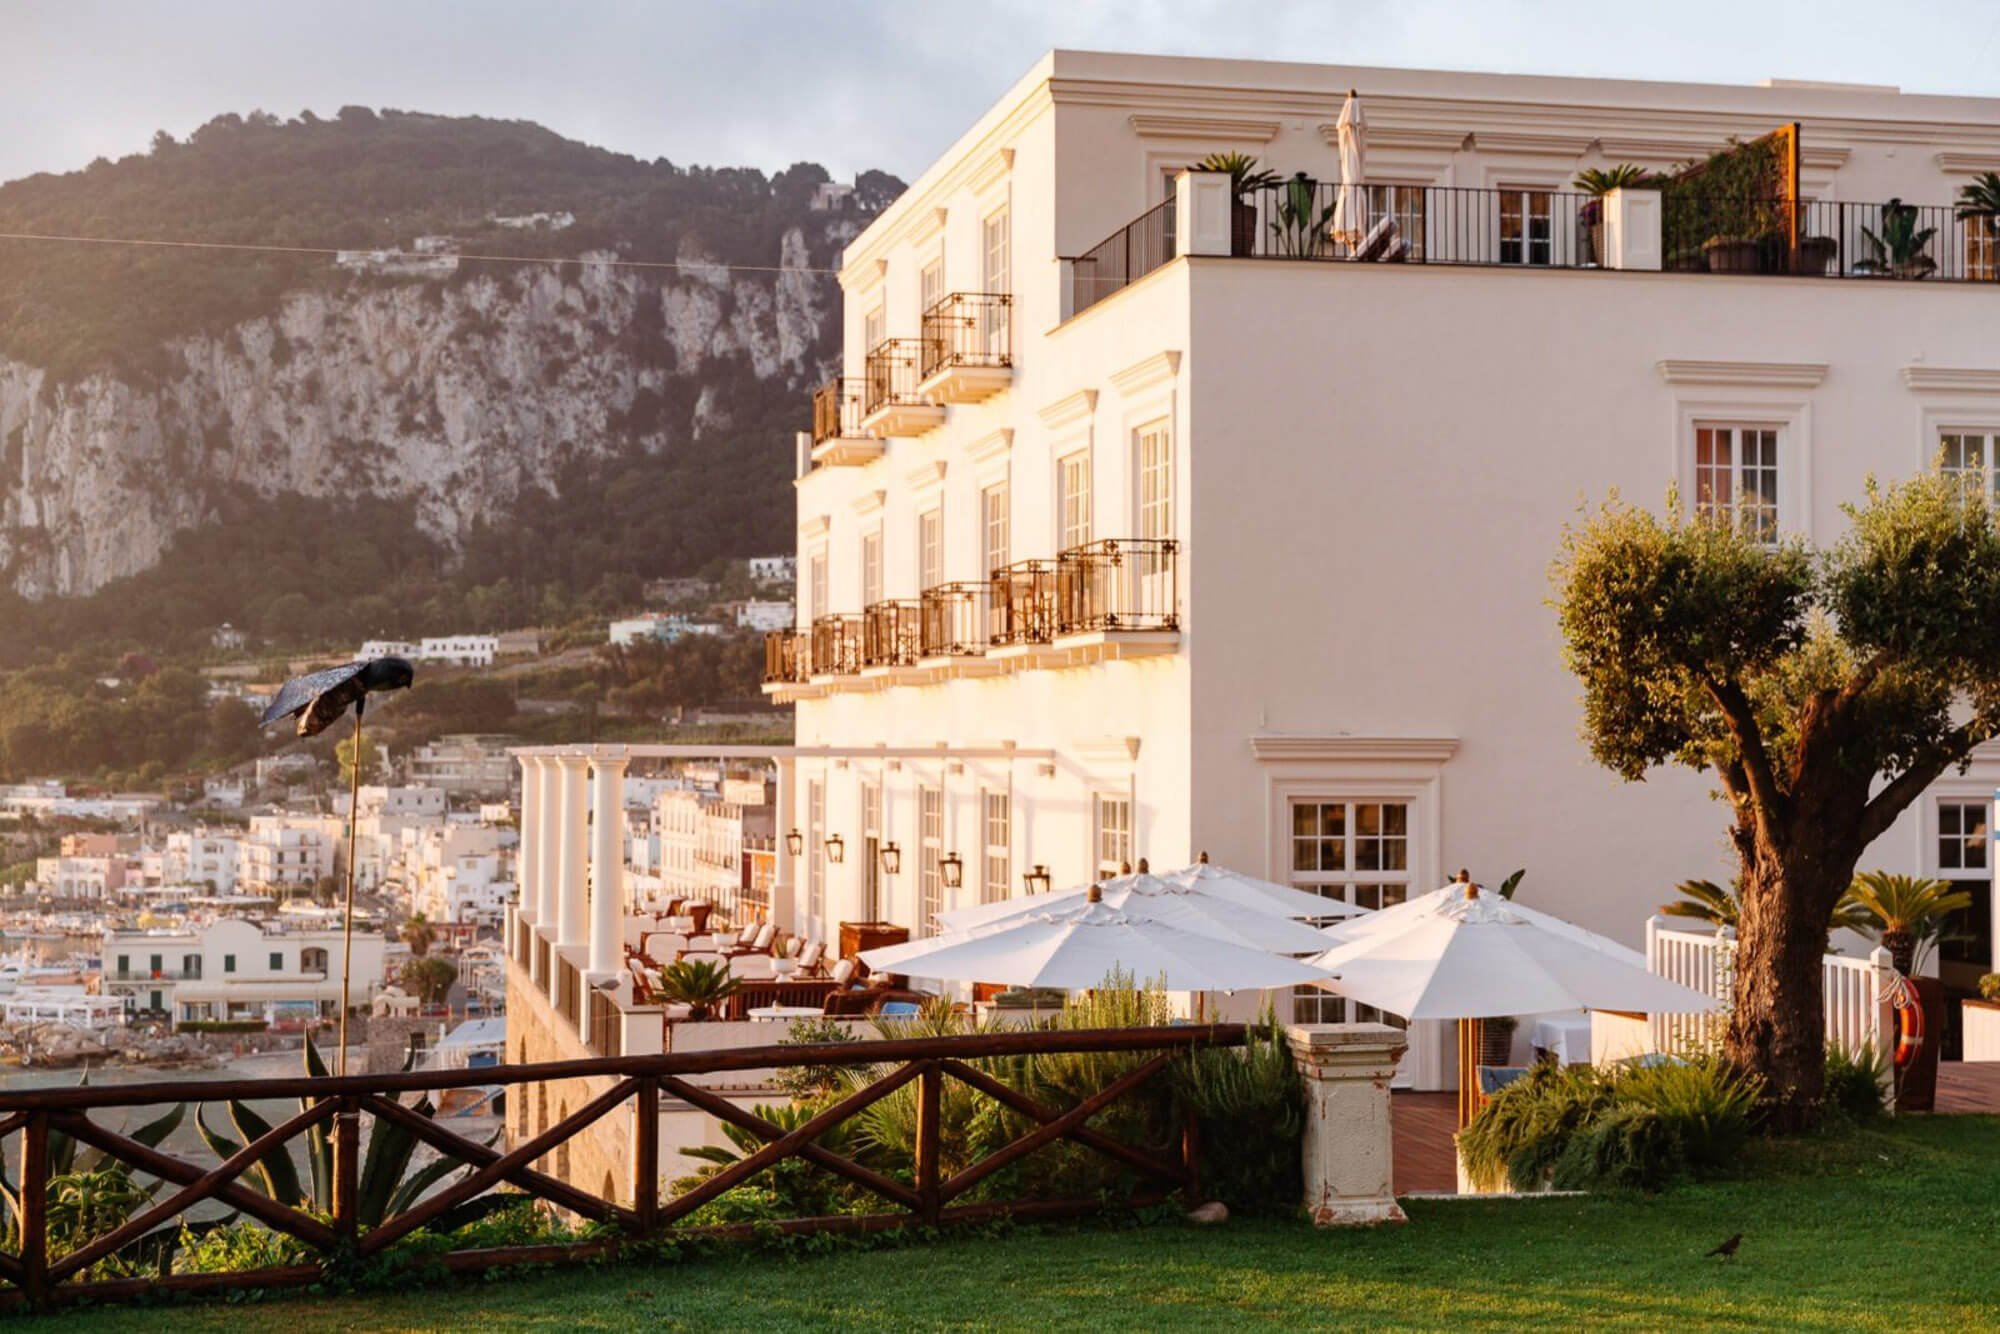 One of the best hotels in Capri, JK Place